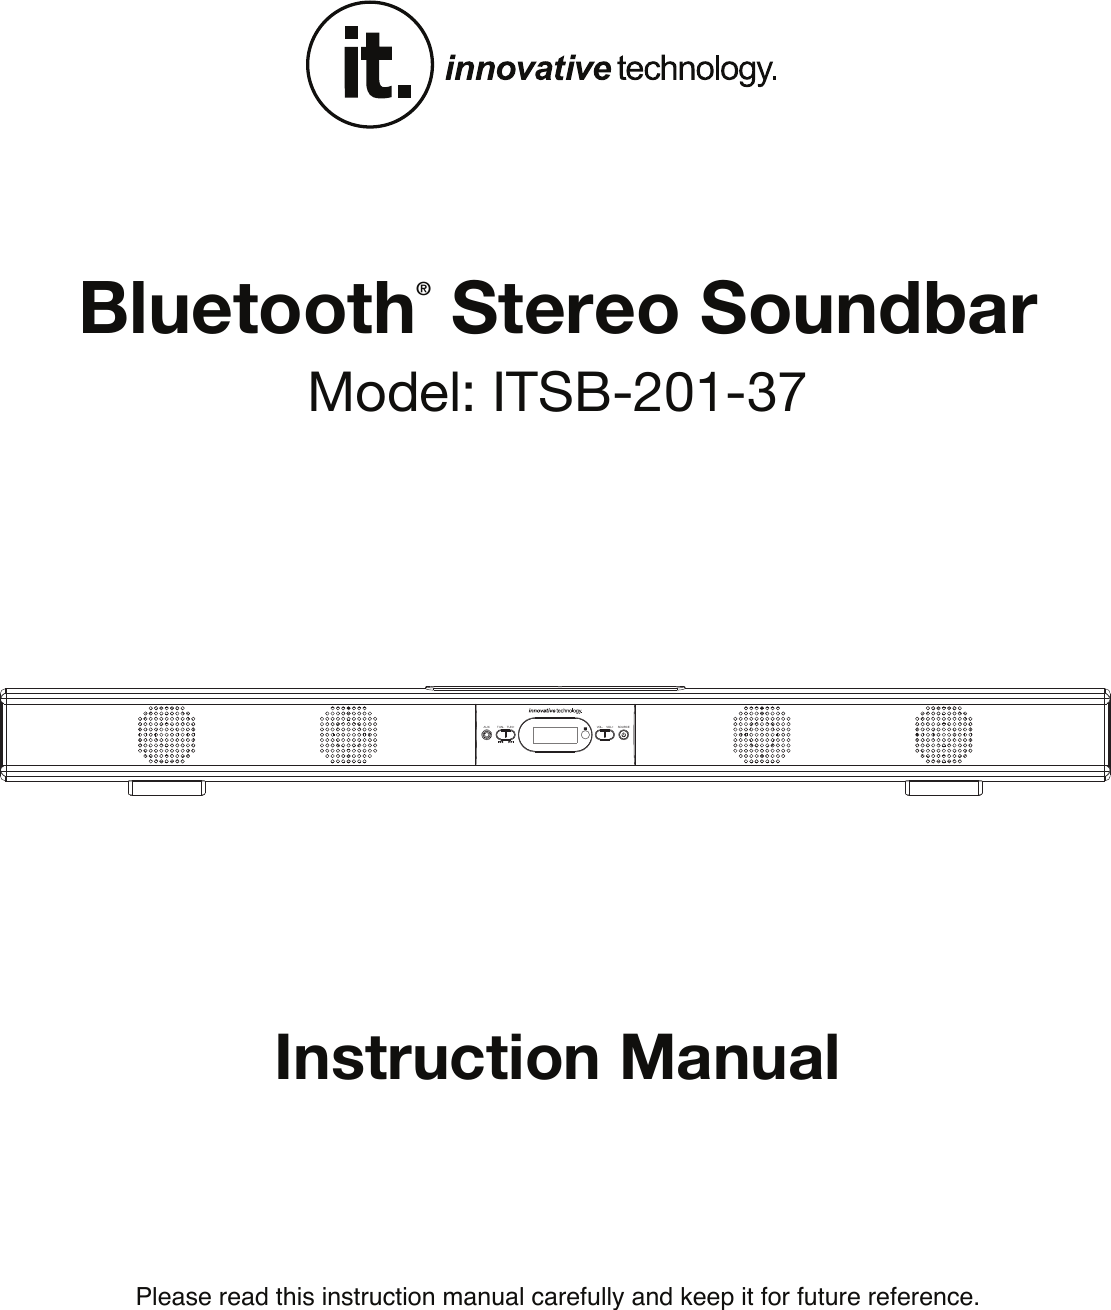 Please read this instruction manual carefully and keep it for future reference.Instruction ManualBluetooth® Stereo SoundbarModel: ITSB-201-37SOURCETUN- TUN+AUX VOL- VOL+